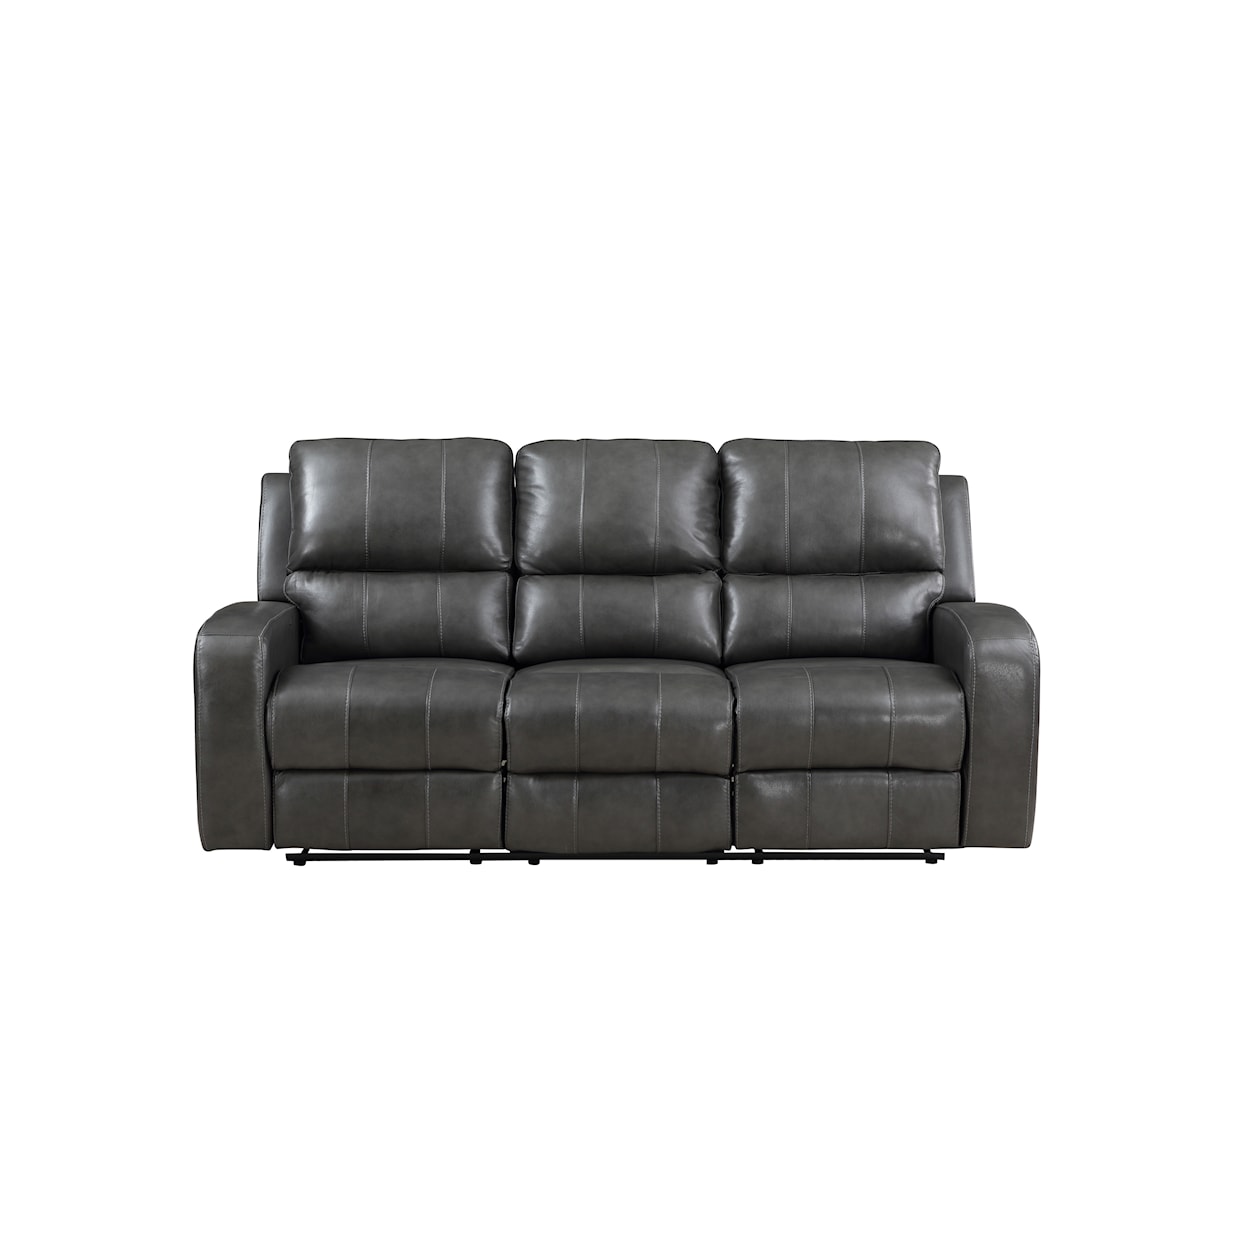 New Classic Linton Leather Sofa W/ Power Footrest